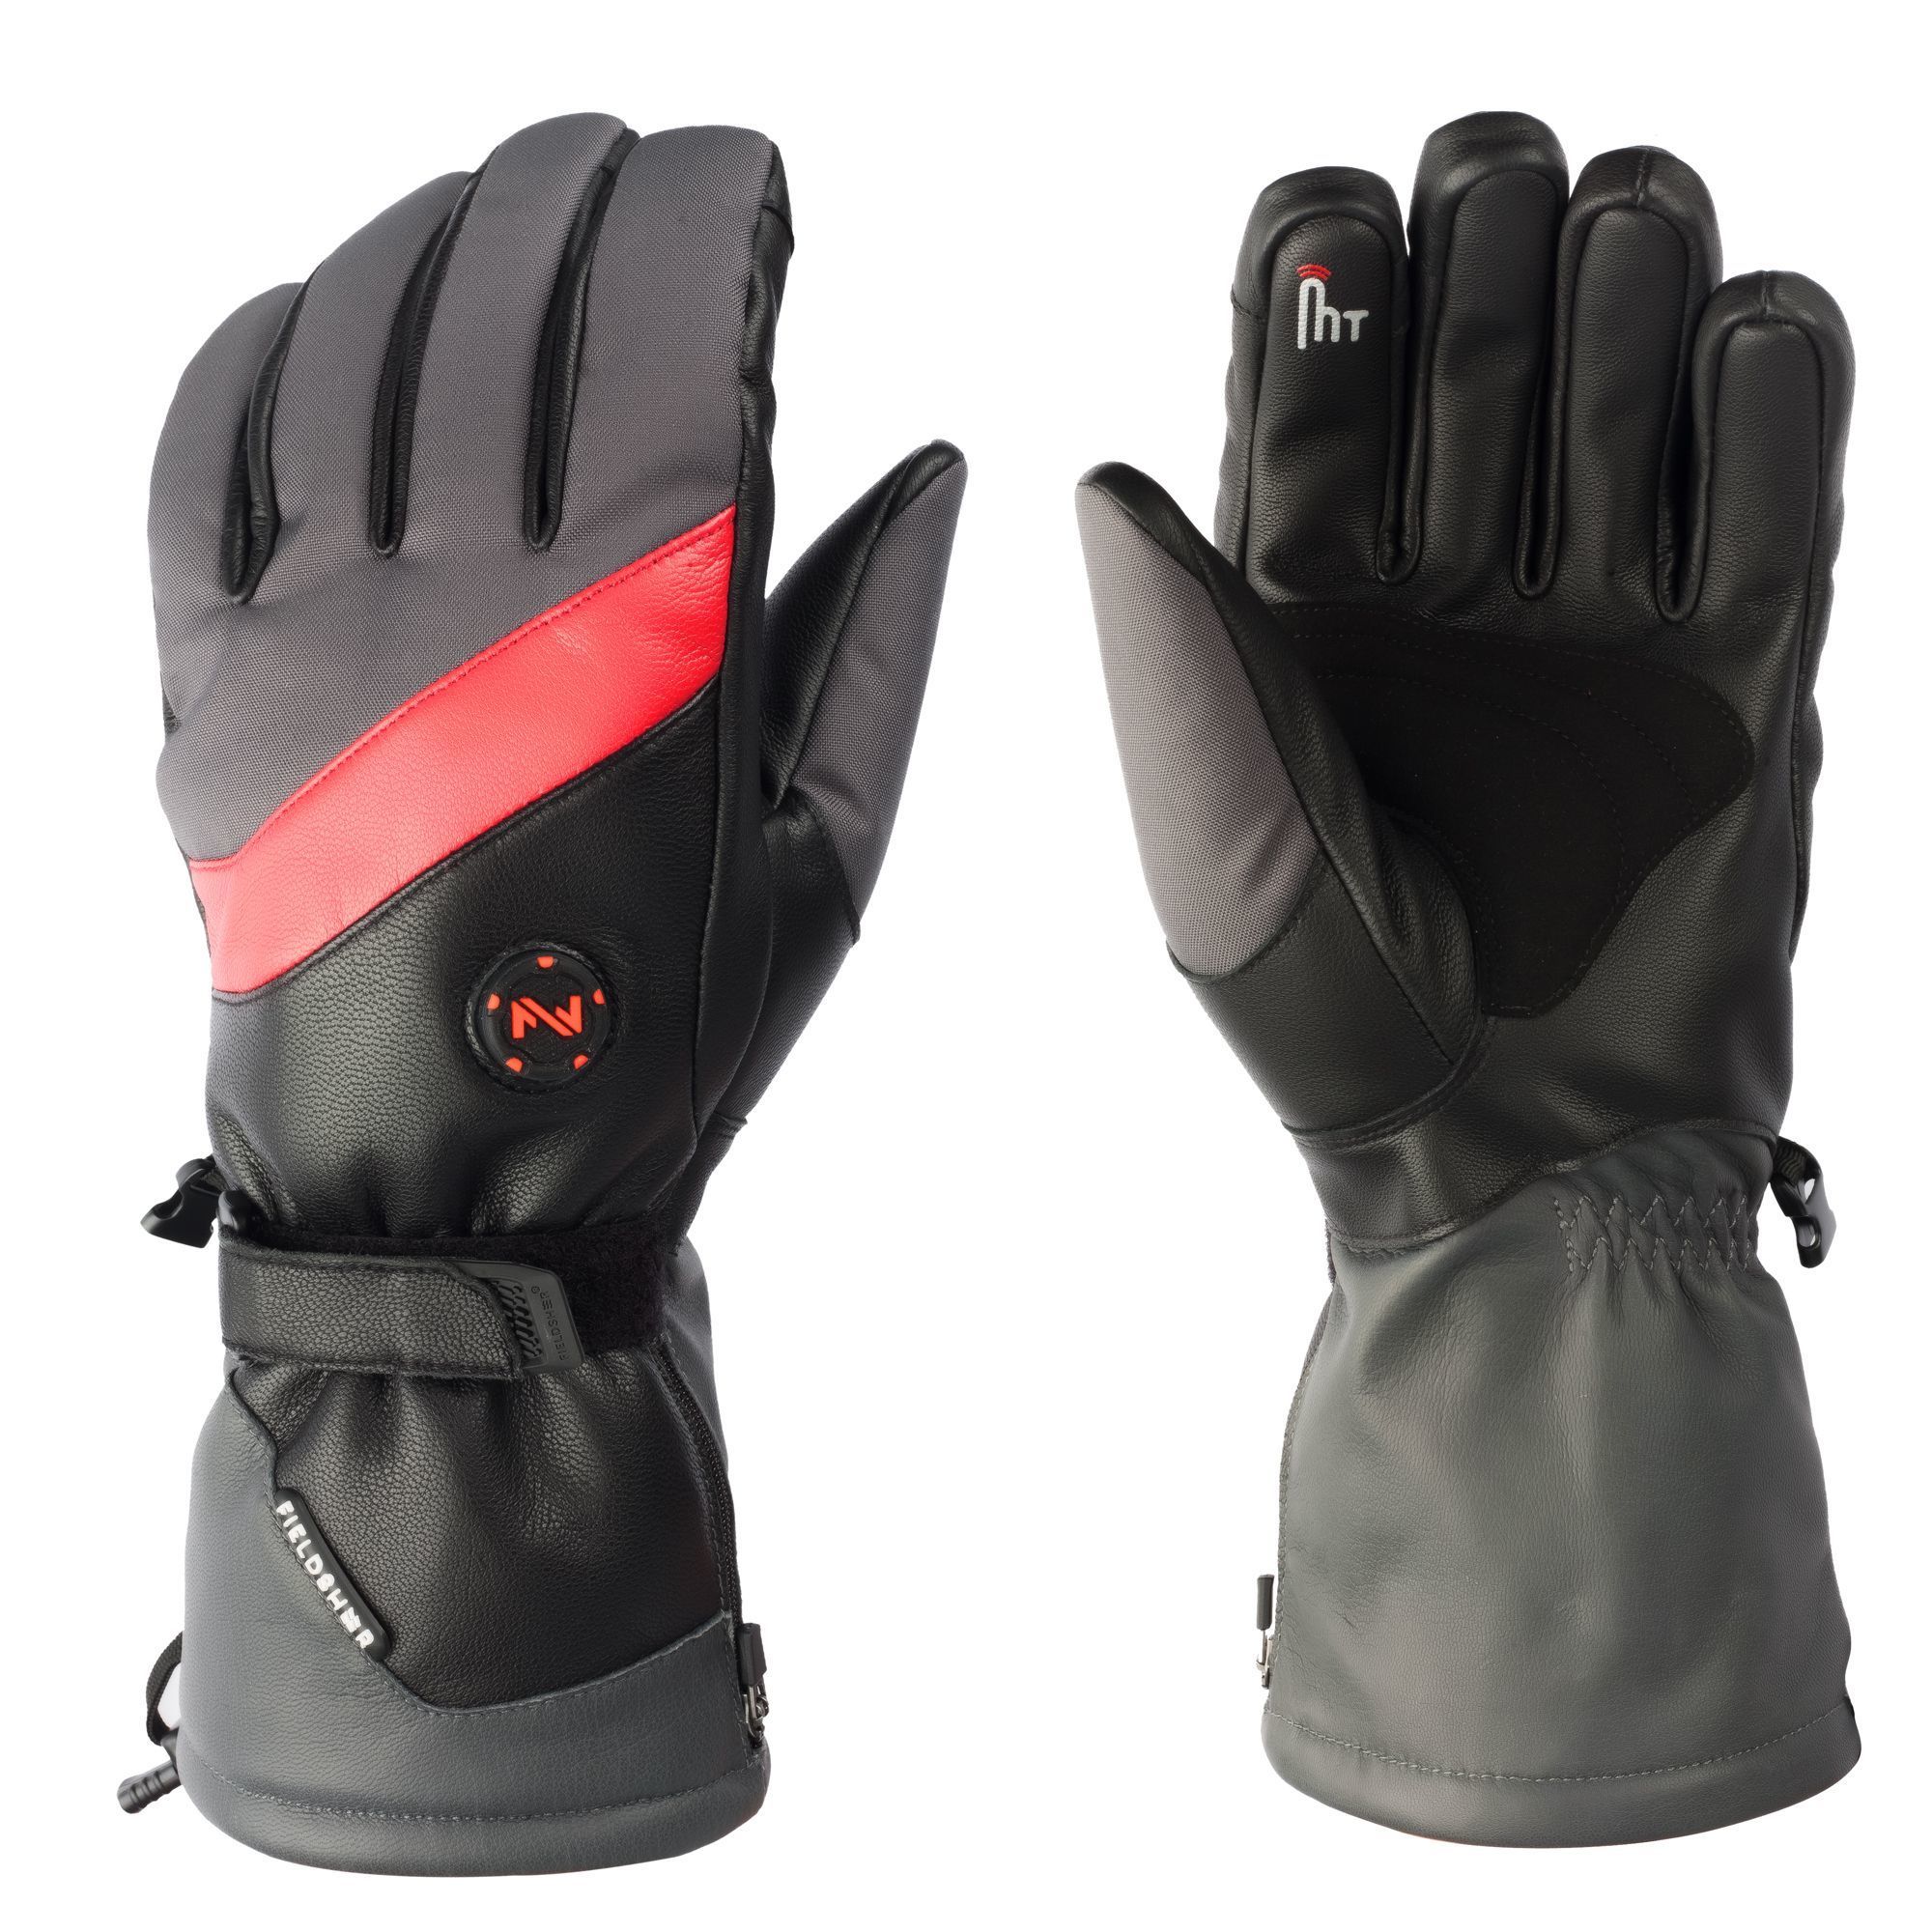 Fieldsheer, Slope Style Glove | Unisex | 7.4V | GRY | SM, Size S, Color Gray, Included (qty.) 2 Model MWUG02240220 -  MOBILE WARMING